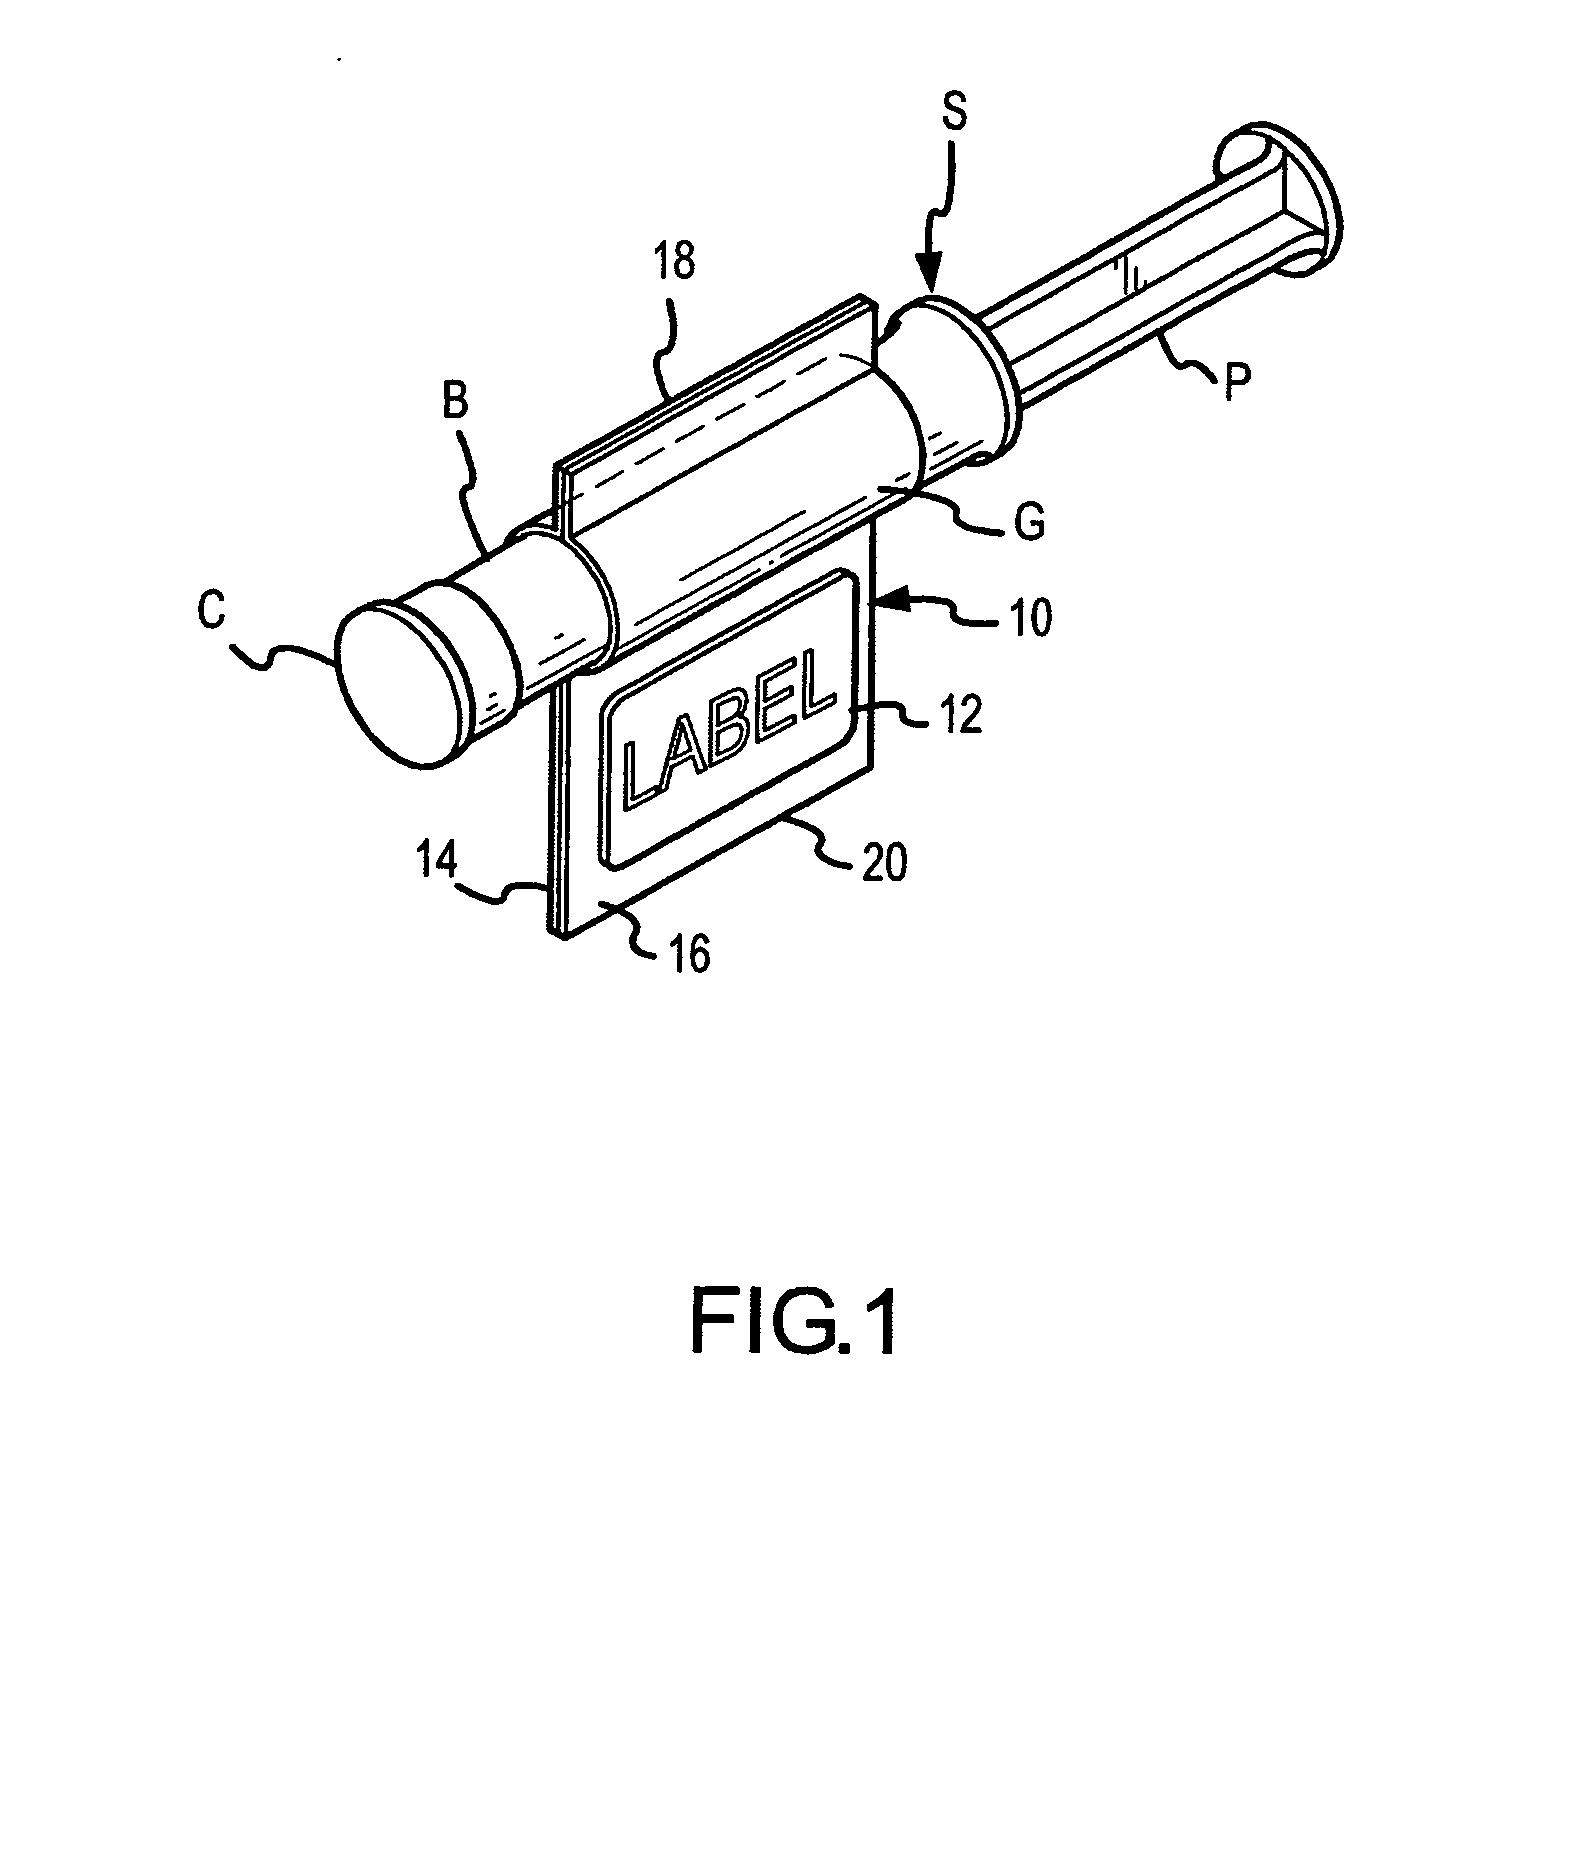 Method, system, and apparatus for handling, labeling, filling, and capping syringes with improved cap